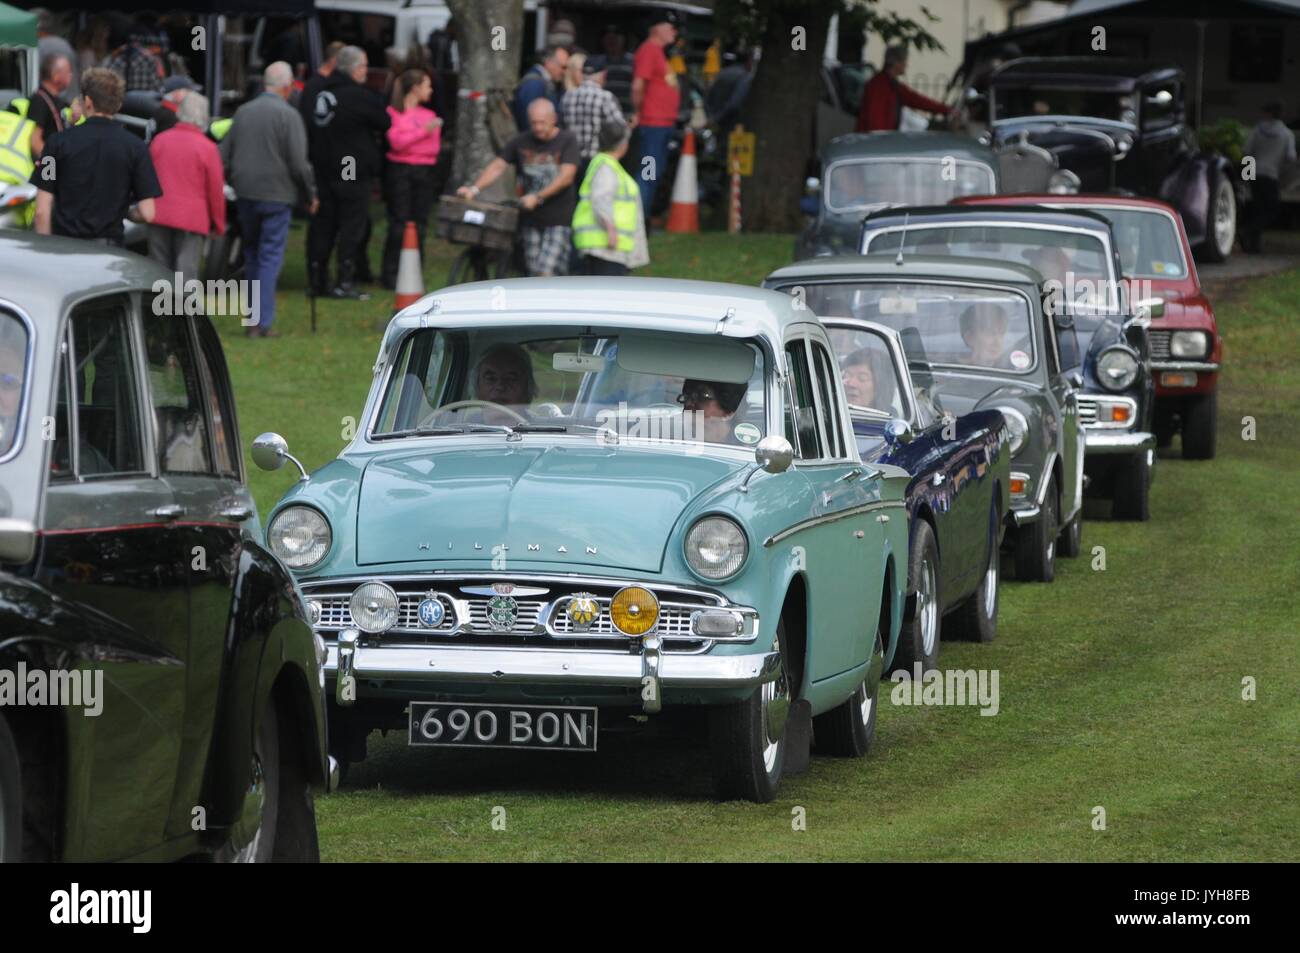 Kington, , UK. 20th Aug, 2017. The Herefordshire market town of Kington came to a standstill while a parade of vintage vehicles made their way to the Kington Vintage Club's 25th Annual Show. Vintage vehicles arrive at the town's Recreation Ground for the event. Credit: Andrew Compton/Alamy Live News Stock Photo